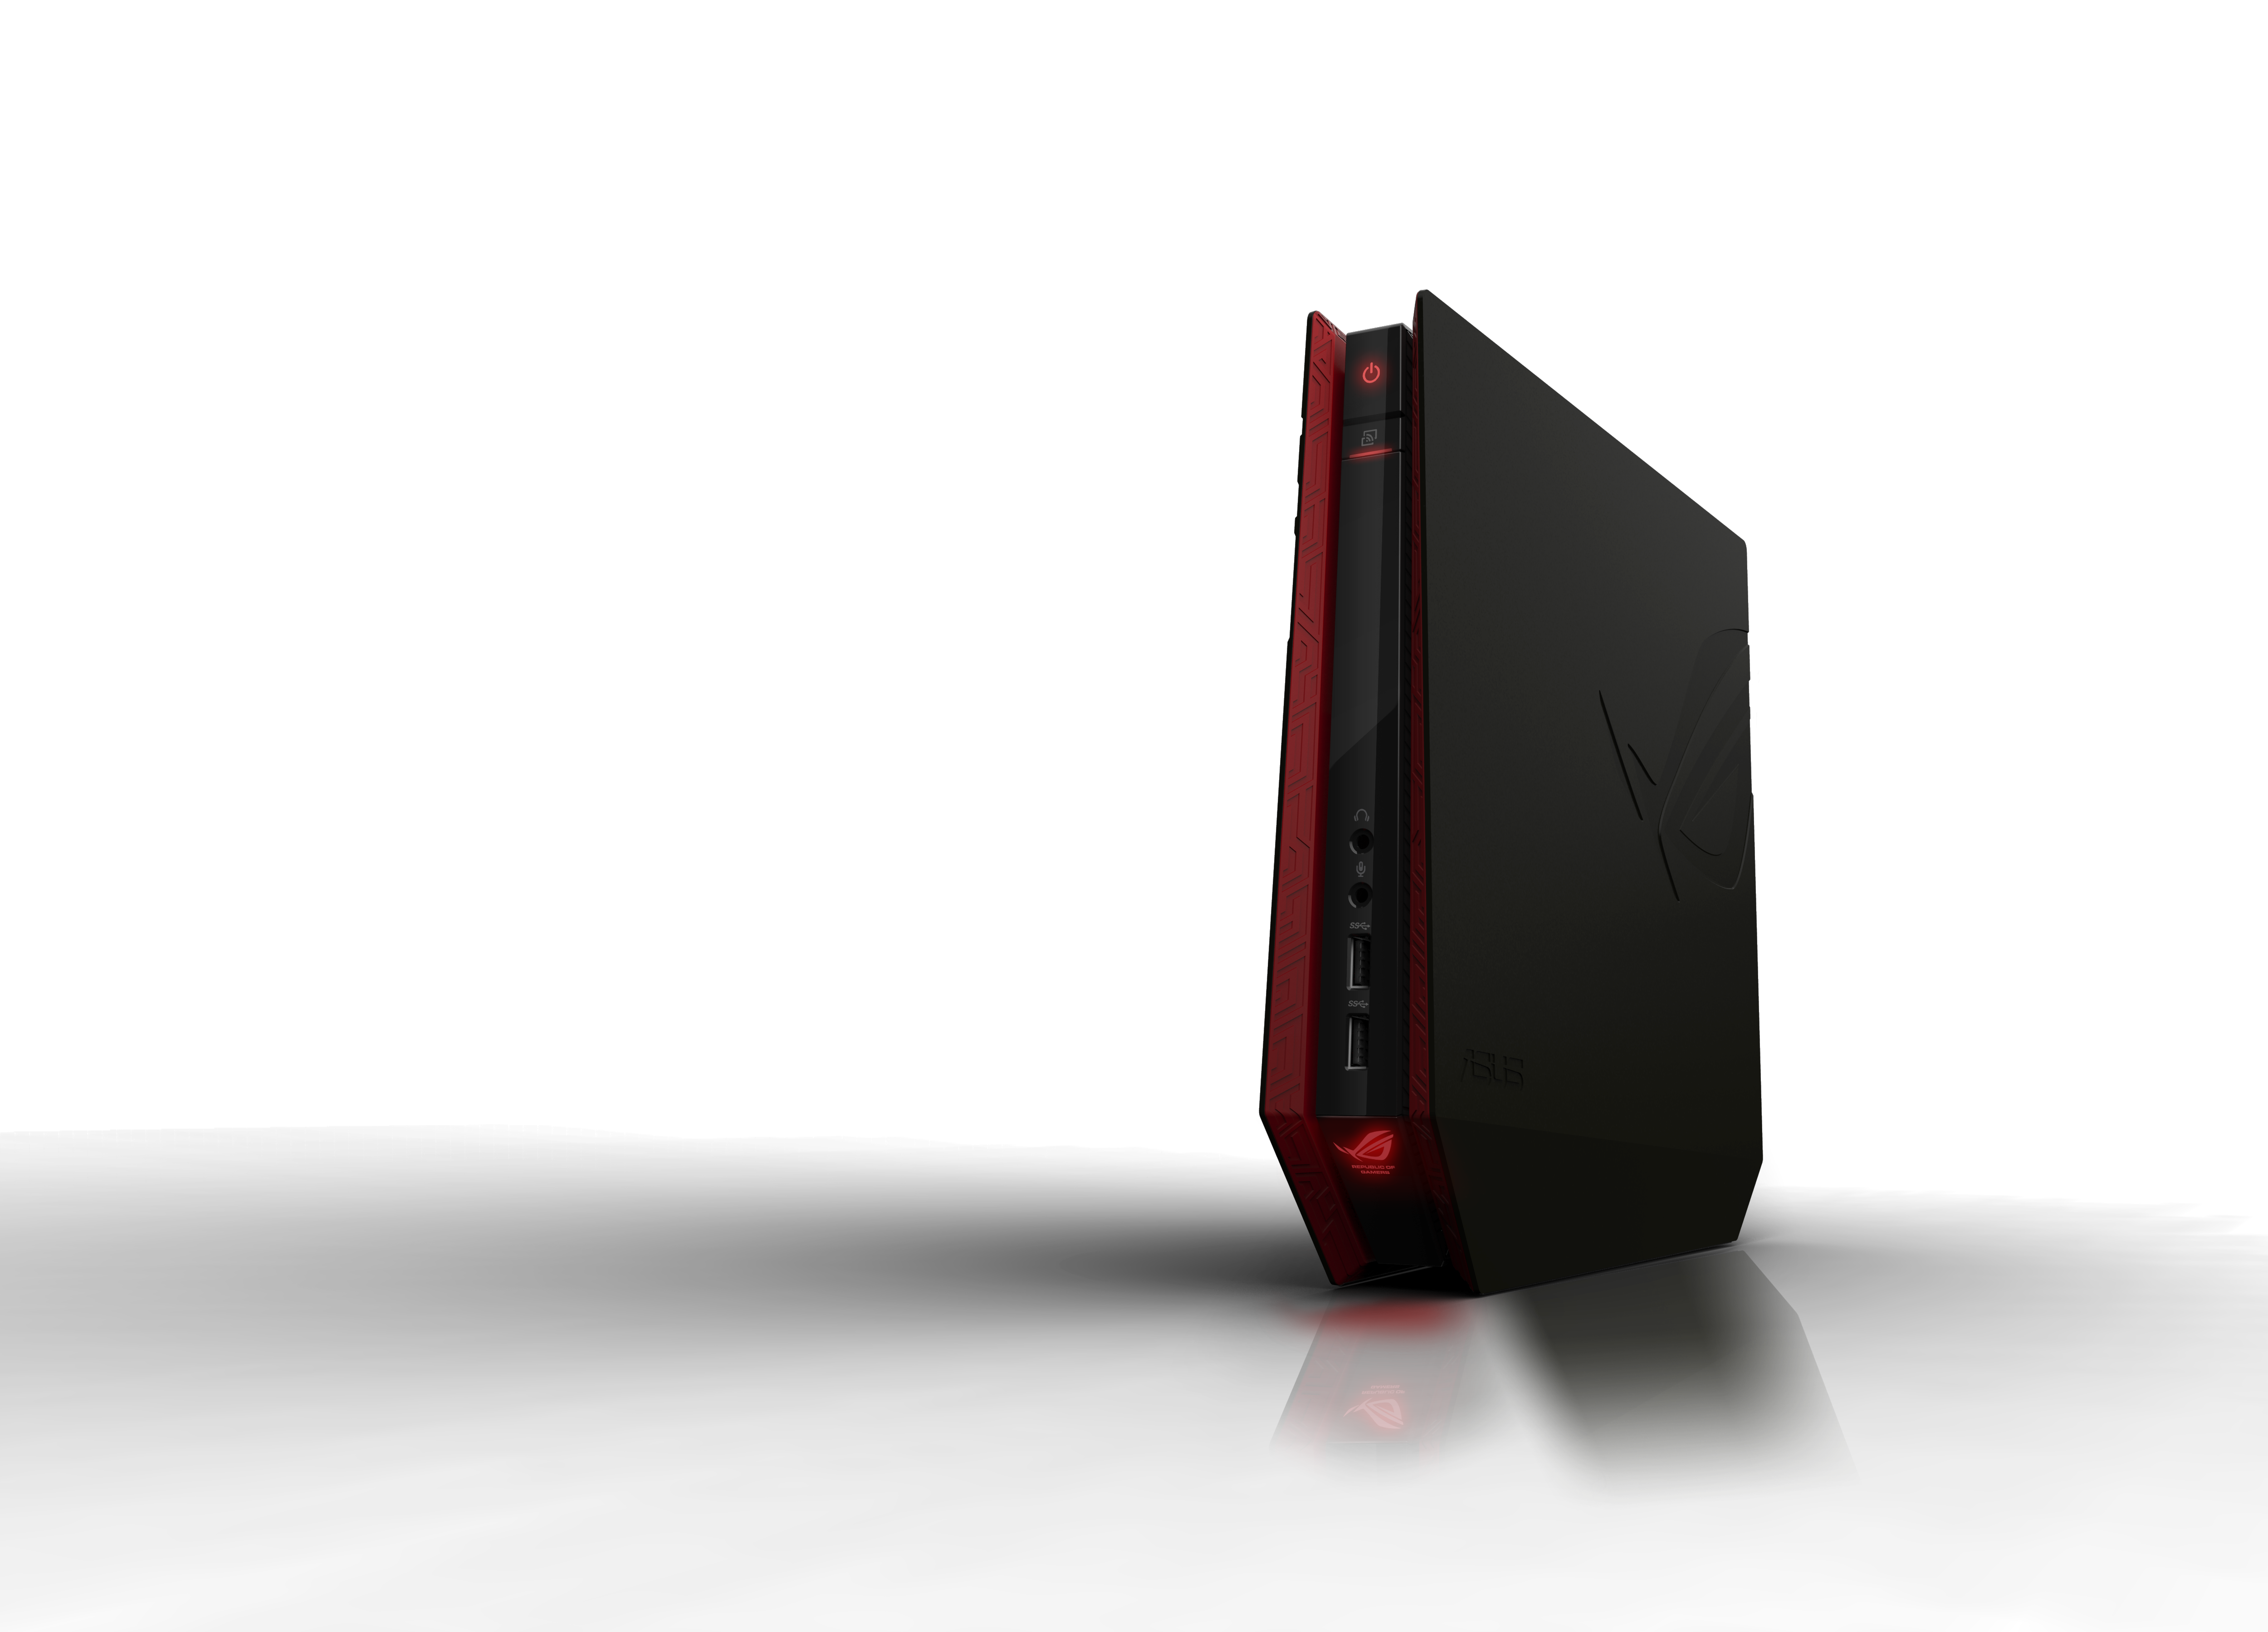 ASUS Launches SFF ROG Gaming PCs: The PC and the GR8 'Console'